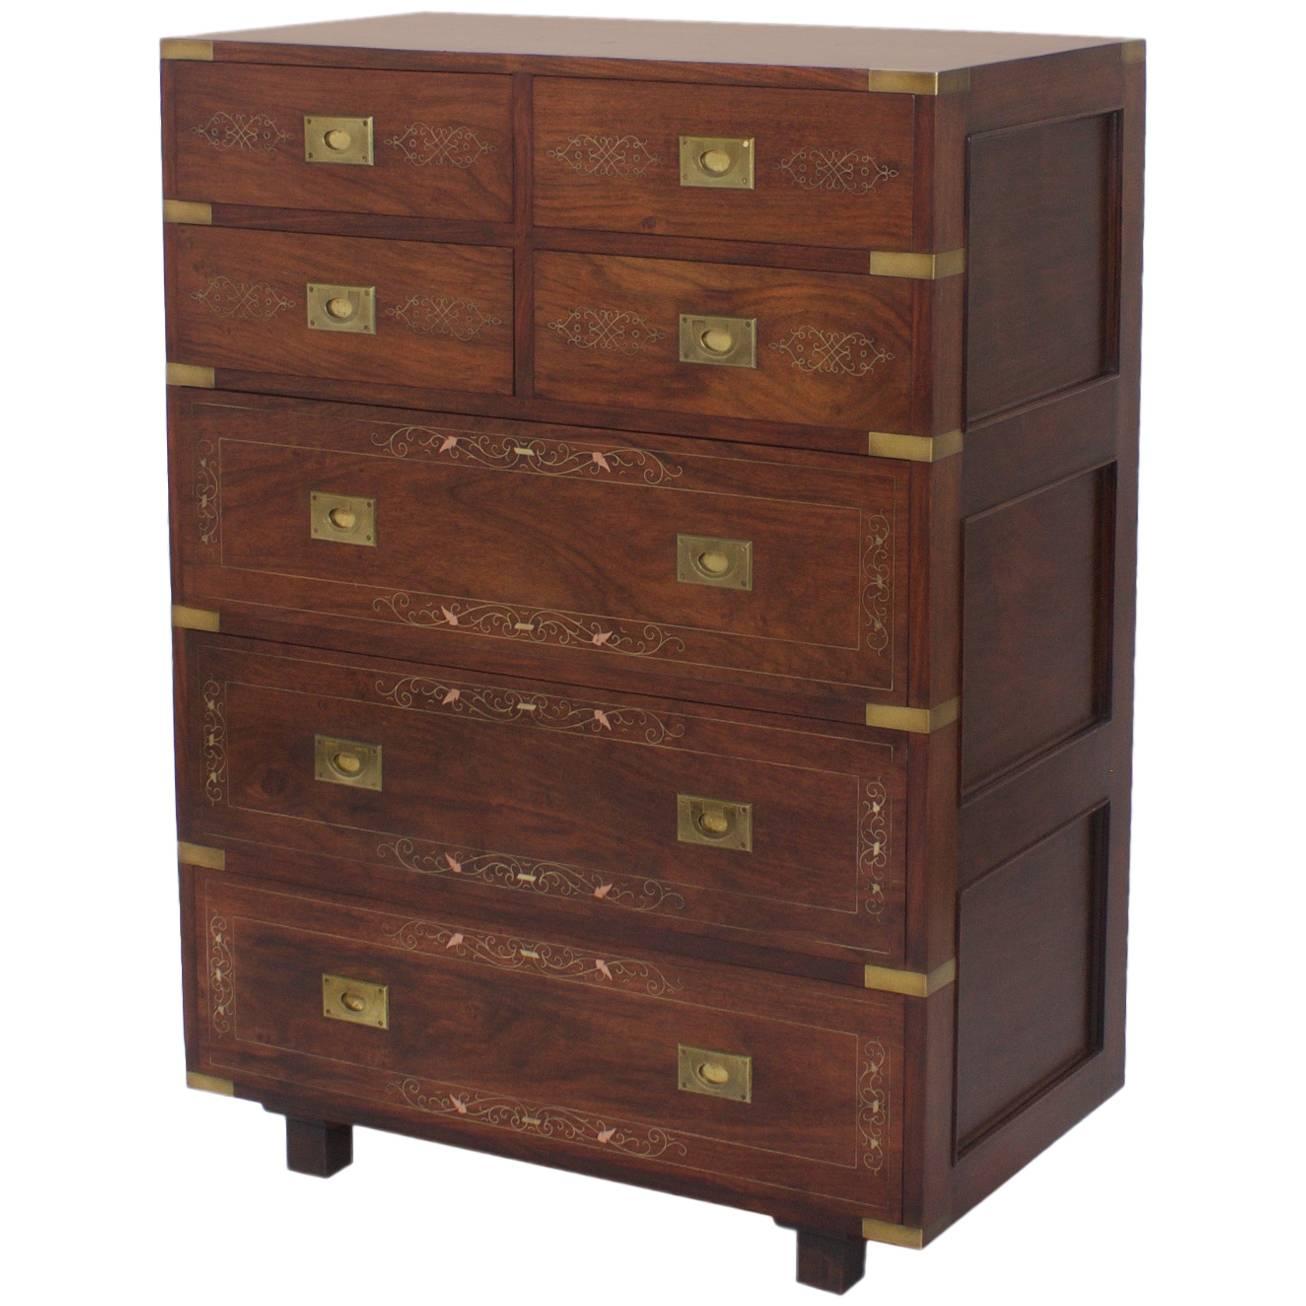 Campaign Style Gentleman's Chest of Drawers